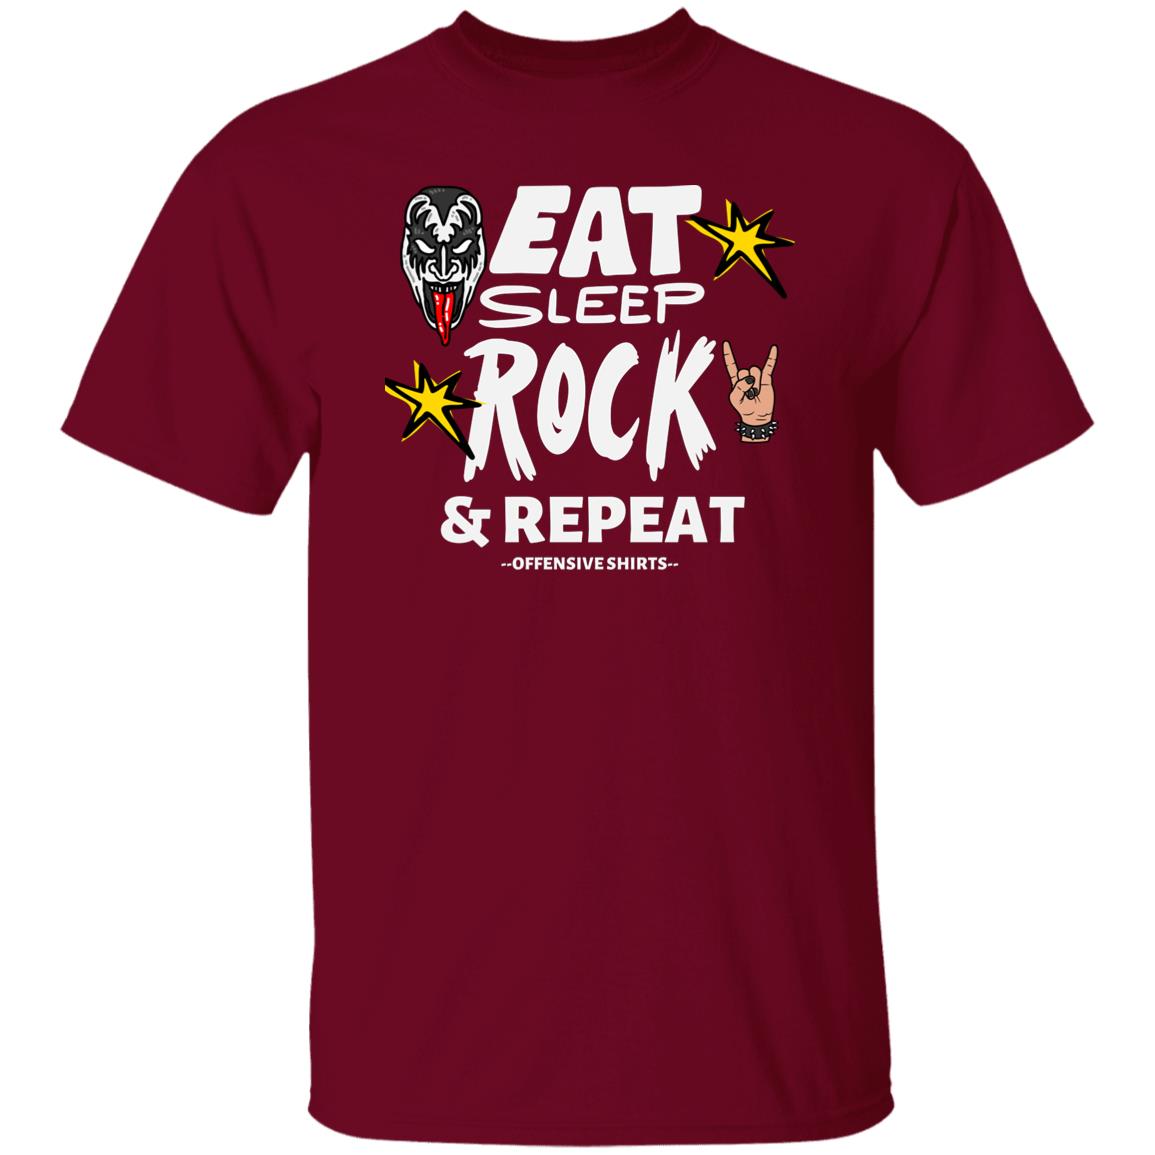 Throwback Classic Rock Heavy Metal Eat Rock Sleep and Repeat T-shirt